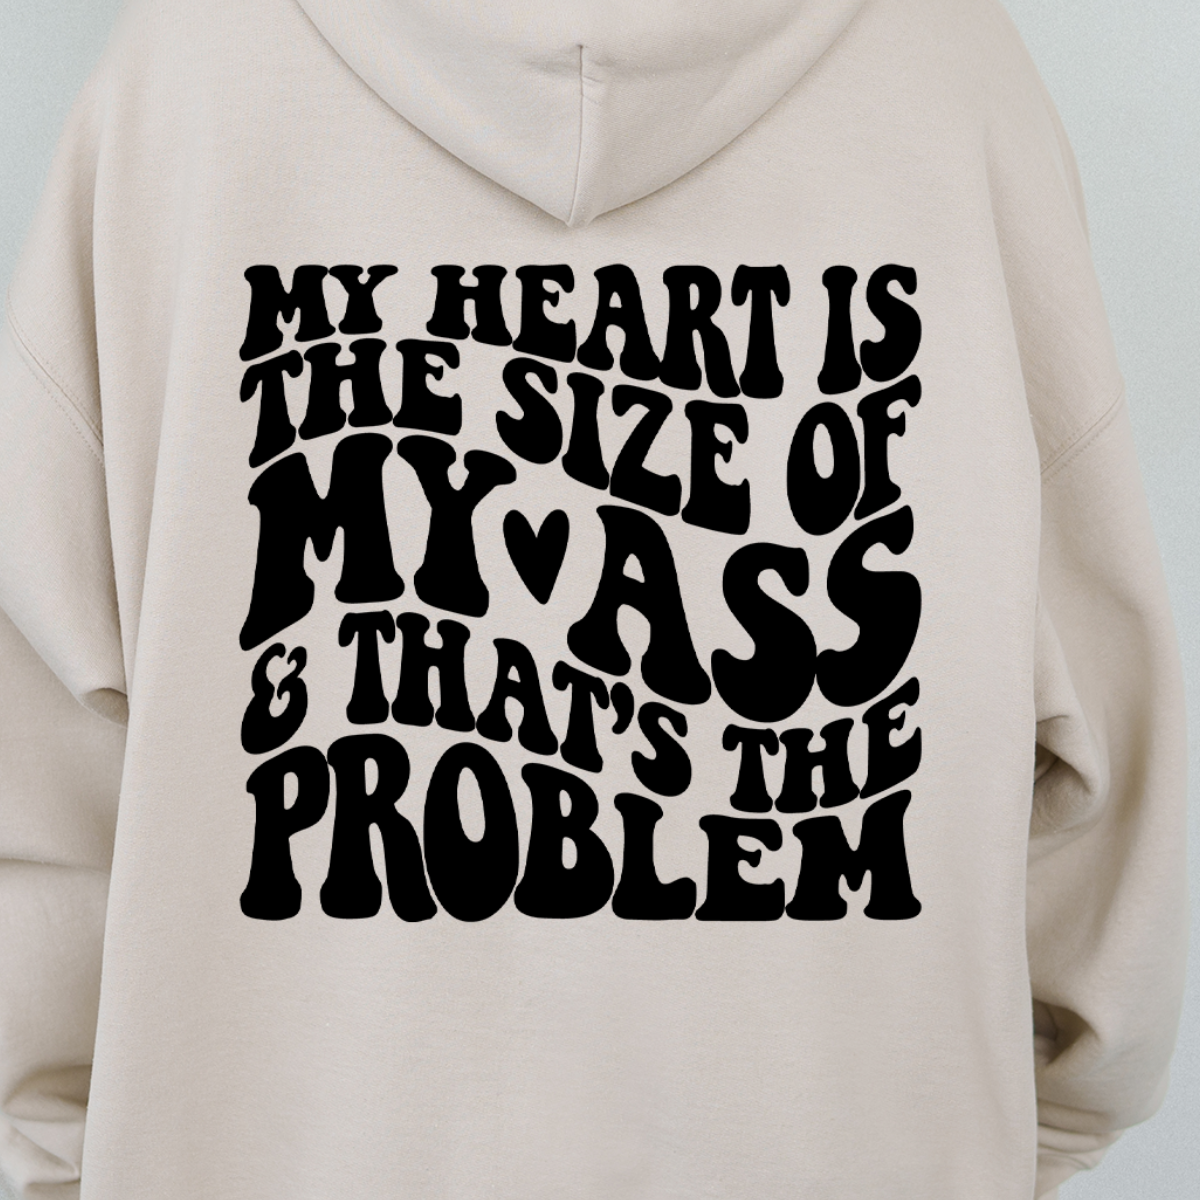 My heart is the size of my... - Unisex Sweatshirt with Hood, Front Pocket